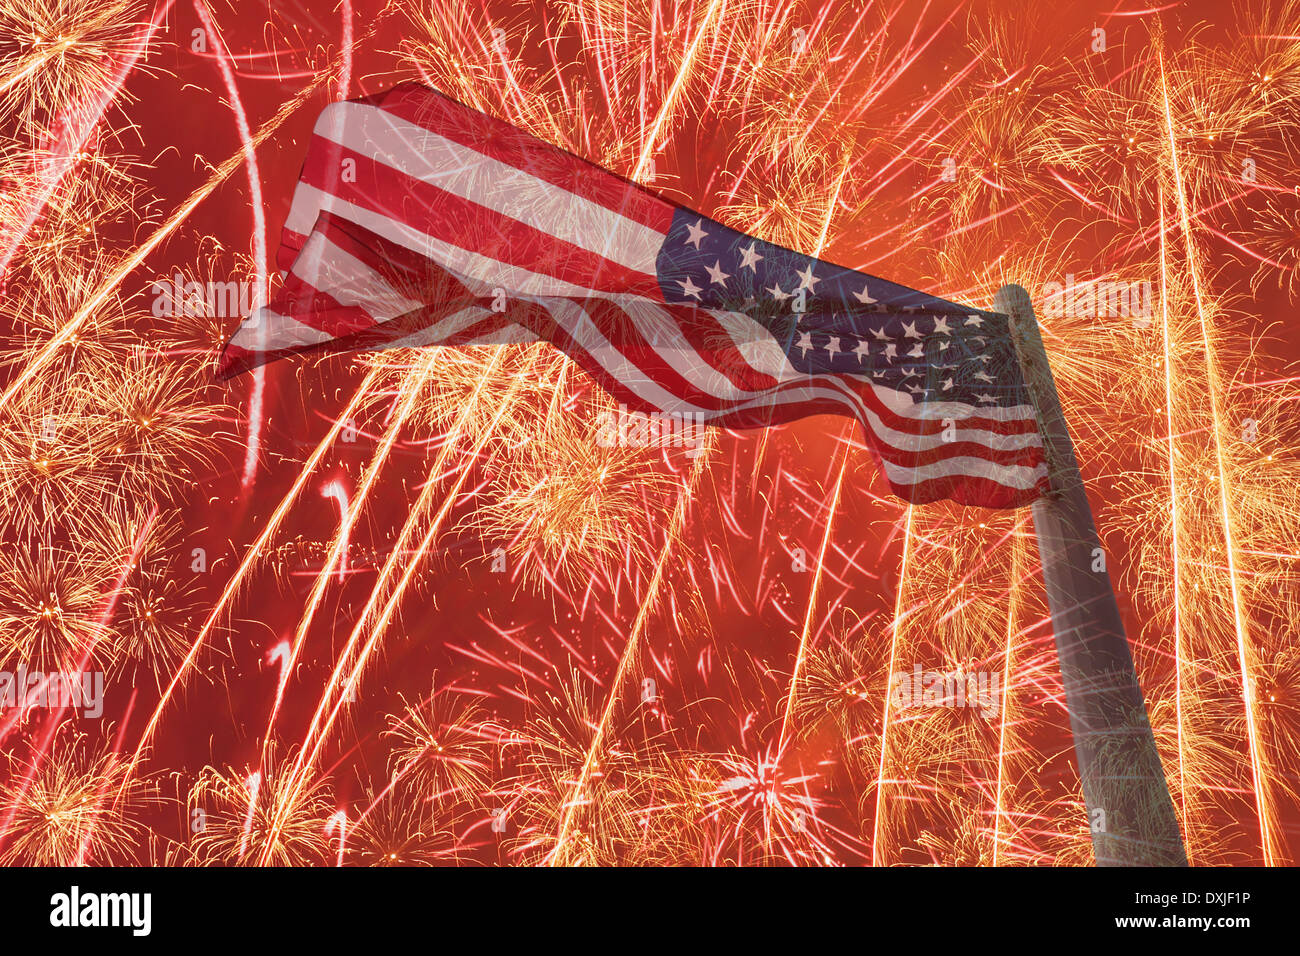 Independence Day background with United States flag over fireworks Stock Photo